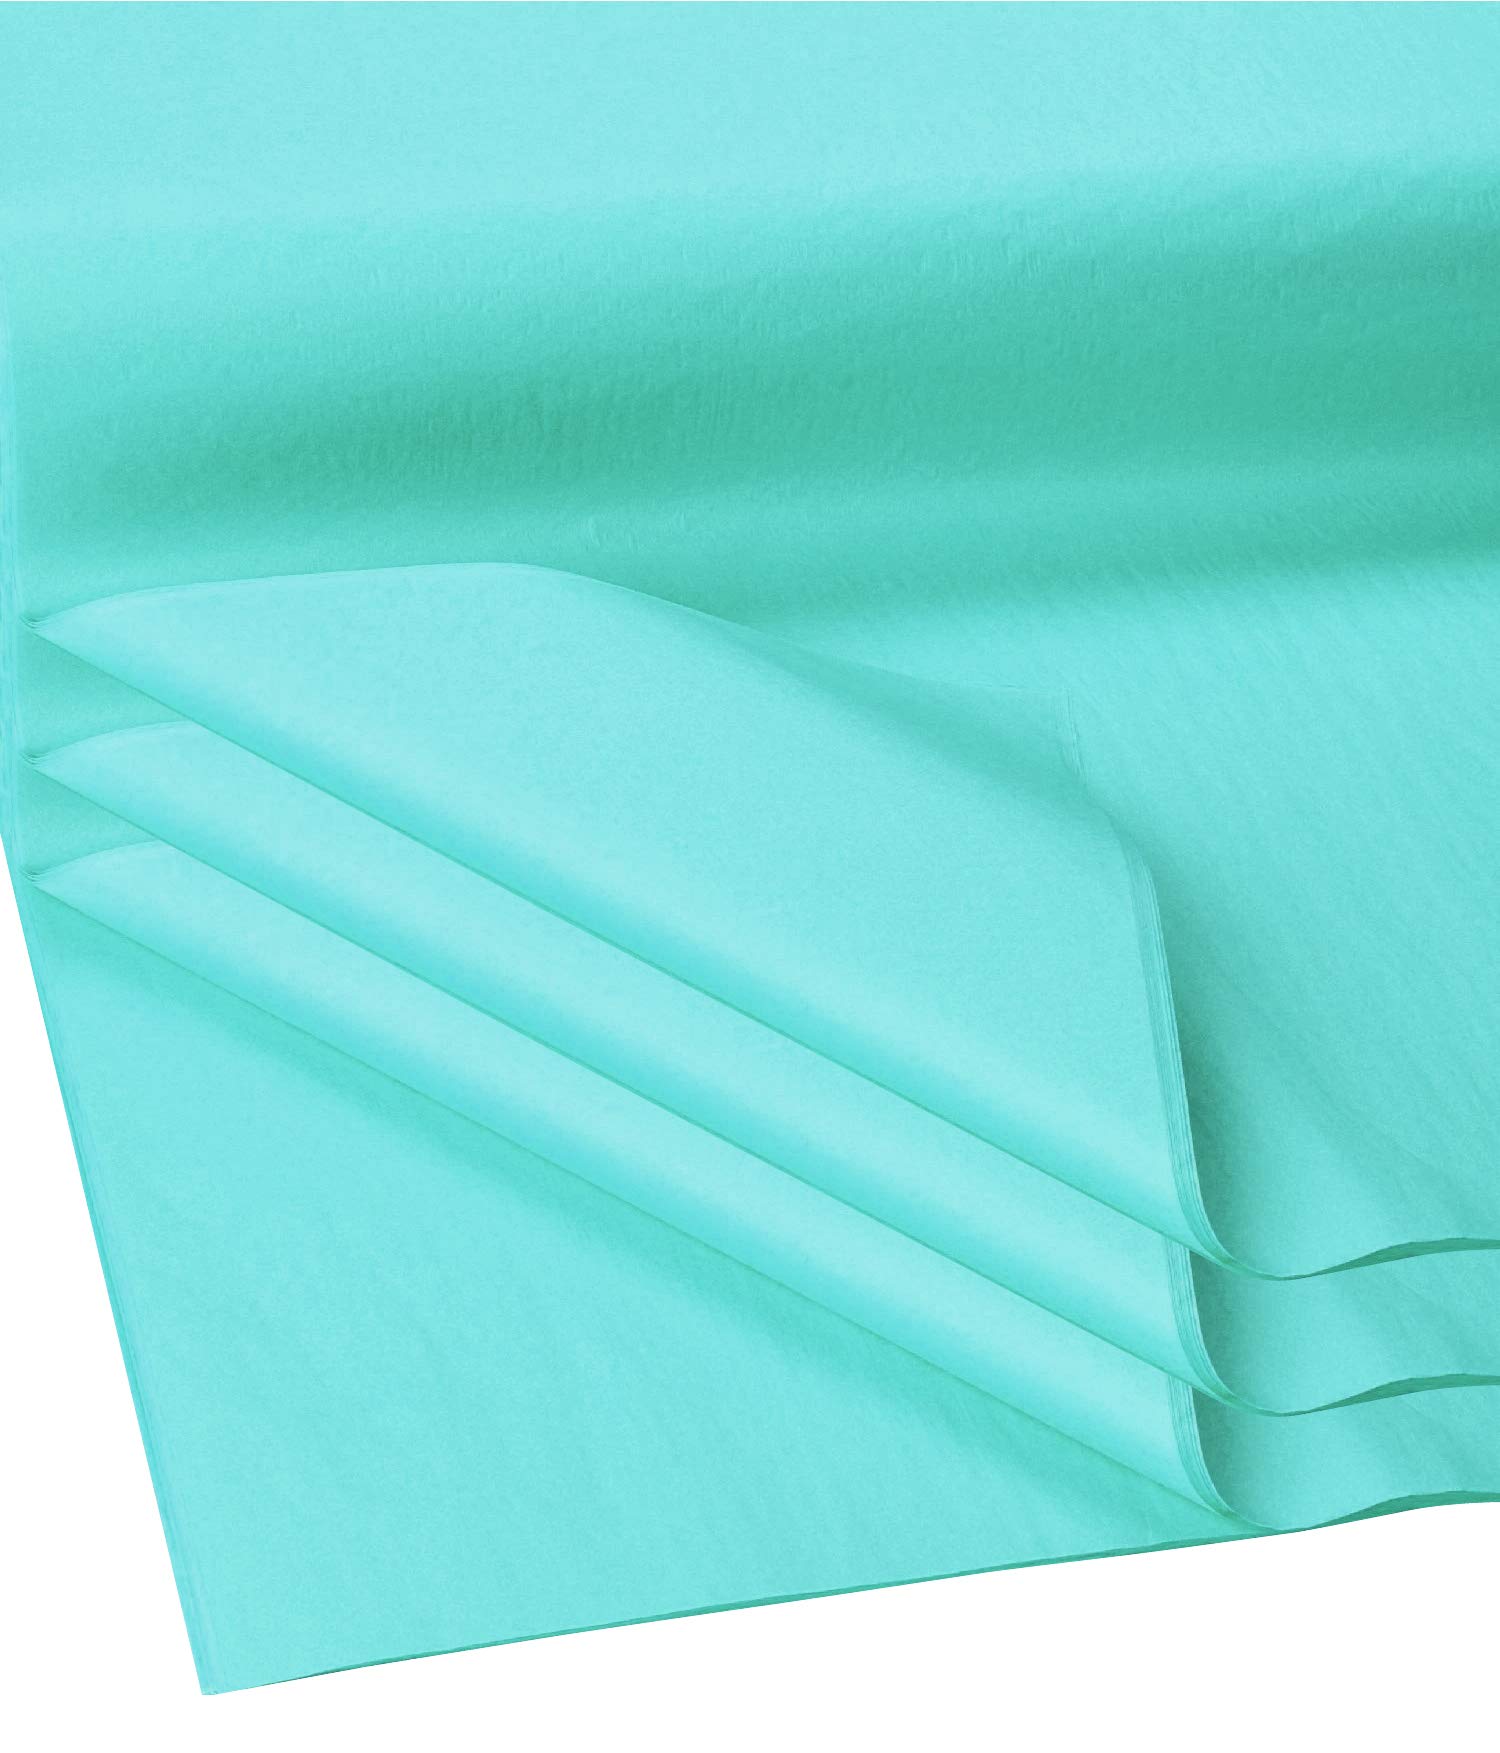 Caribbean Teal Wrap Tissue Paper 15 Inch X 20 Inch - 100 Sheets